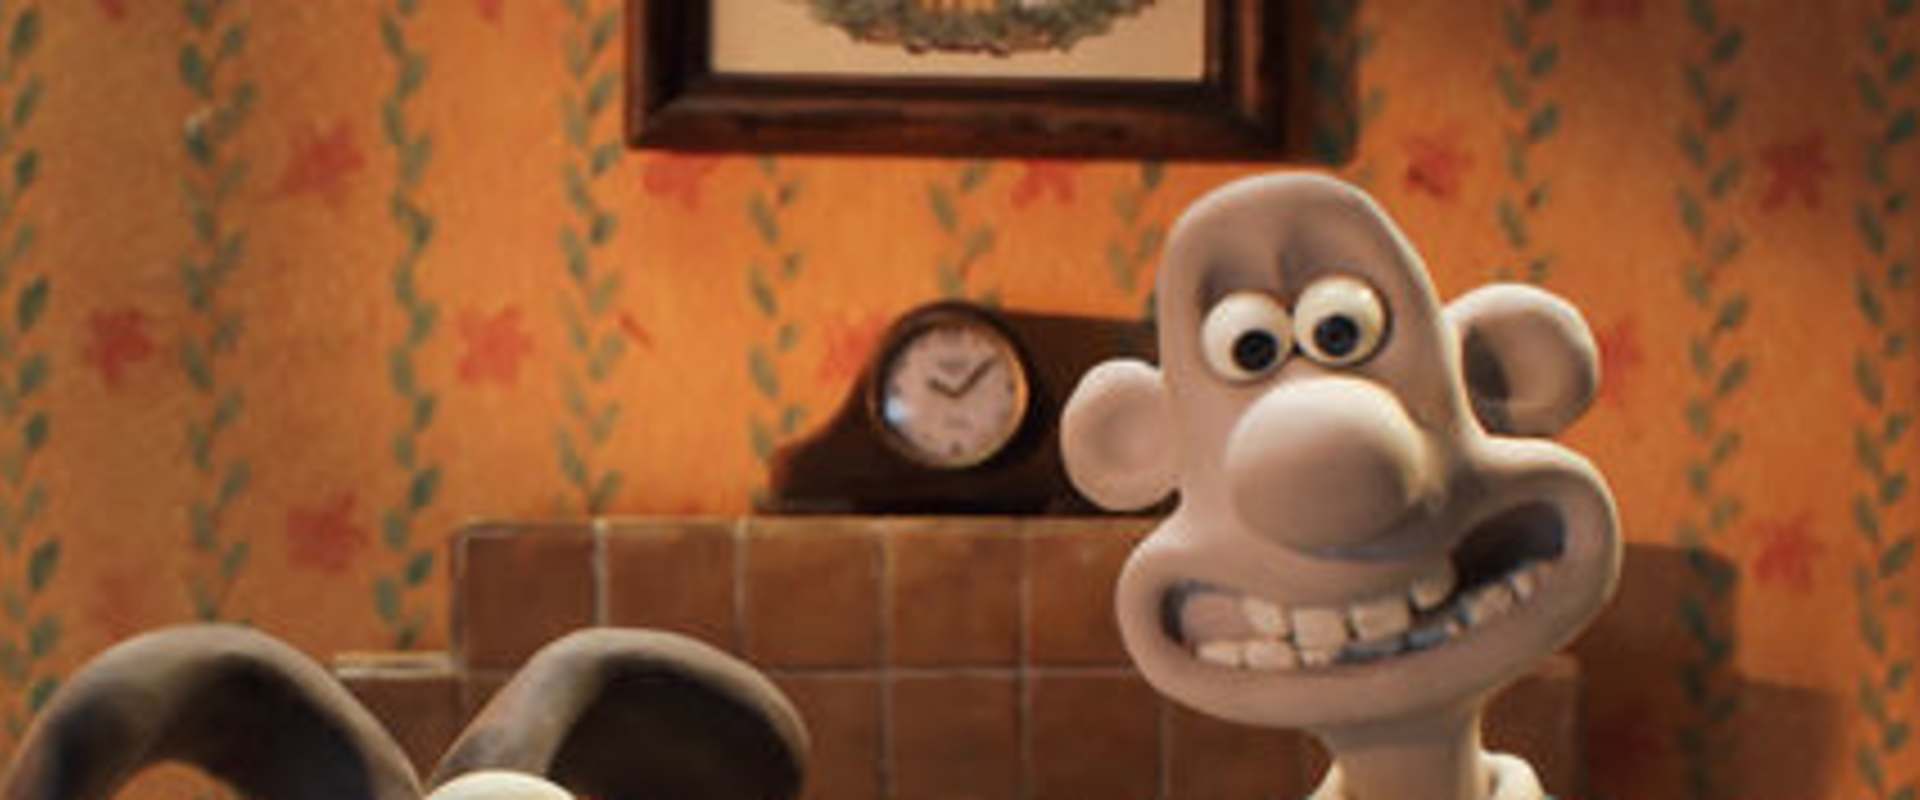 A Grand Night In: The Story of Aardman background 2